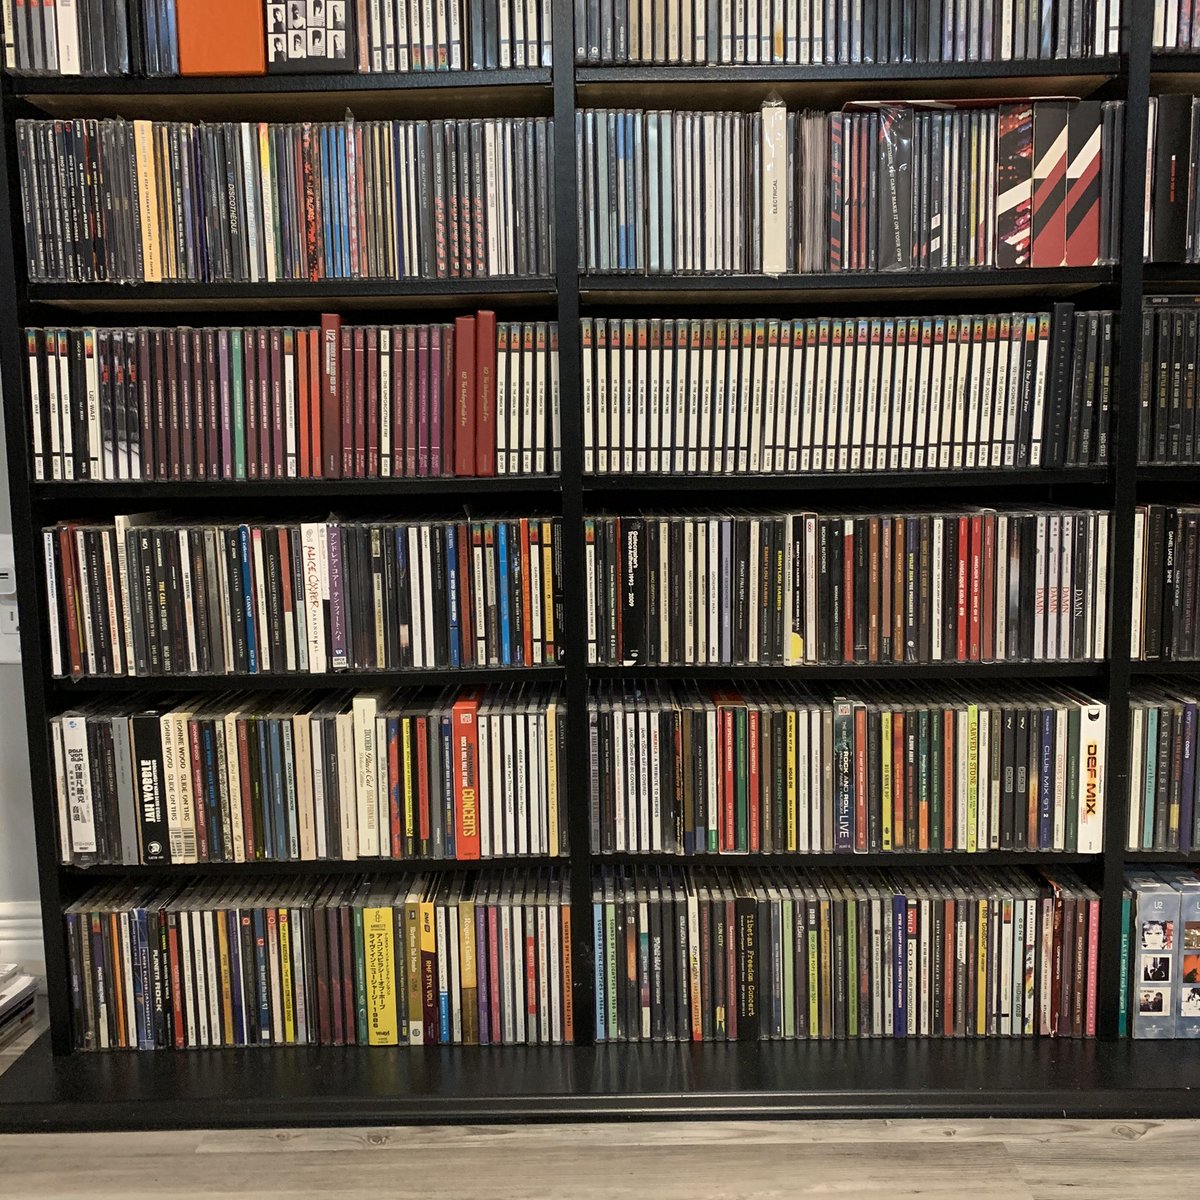 Photo 9: CDs. Yes that’s a lot of Joshua Tree albums, and yes they all have some differences from one another. (And some still need to be sorted and scanned for the site) Bottom rows include collaborations U2 have been a part of or compilations that include a U2 track.